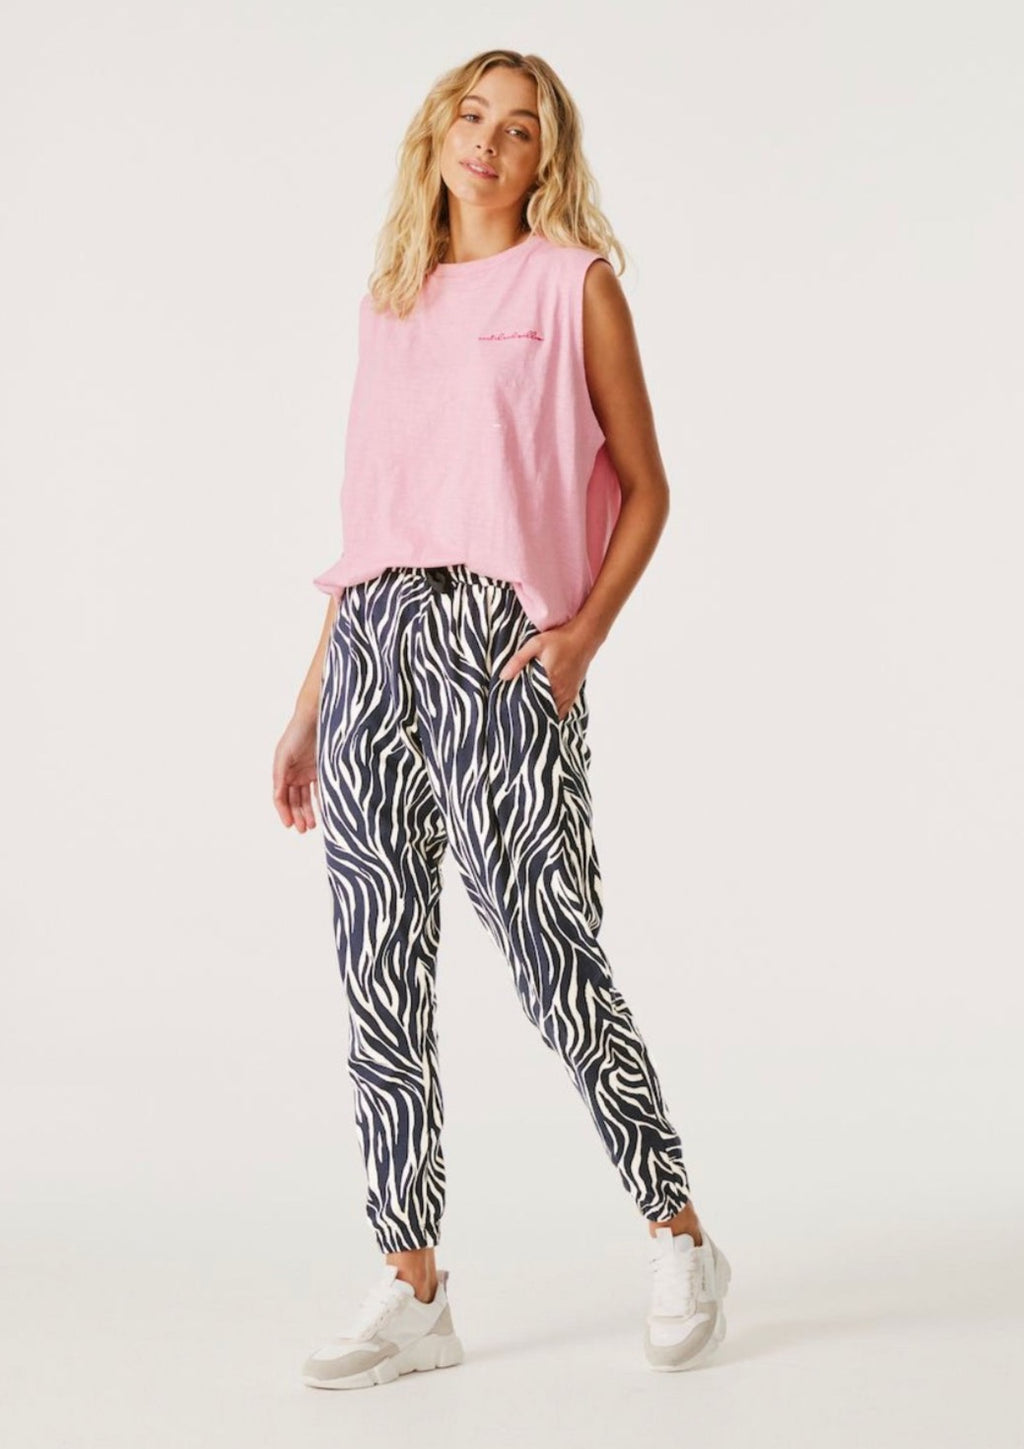 Comeback Pant - Black Zebra  The ultimate off-duty pant, in the gorgeous new Black Zebra print.  Pair it with any of your basic white or black cotton tees and trainers for a relaxed off-duty look.